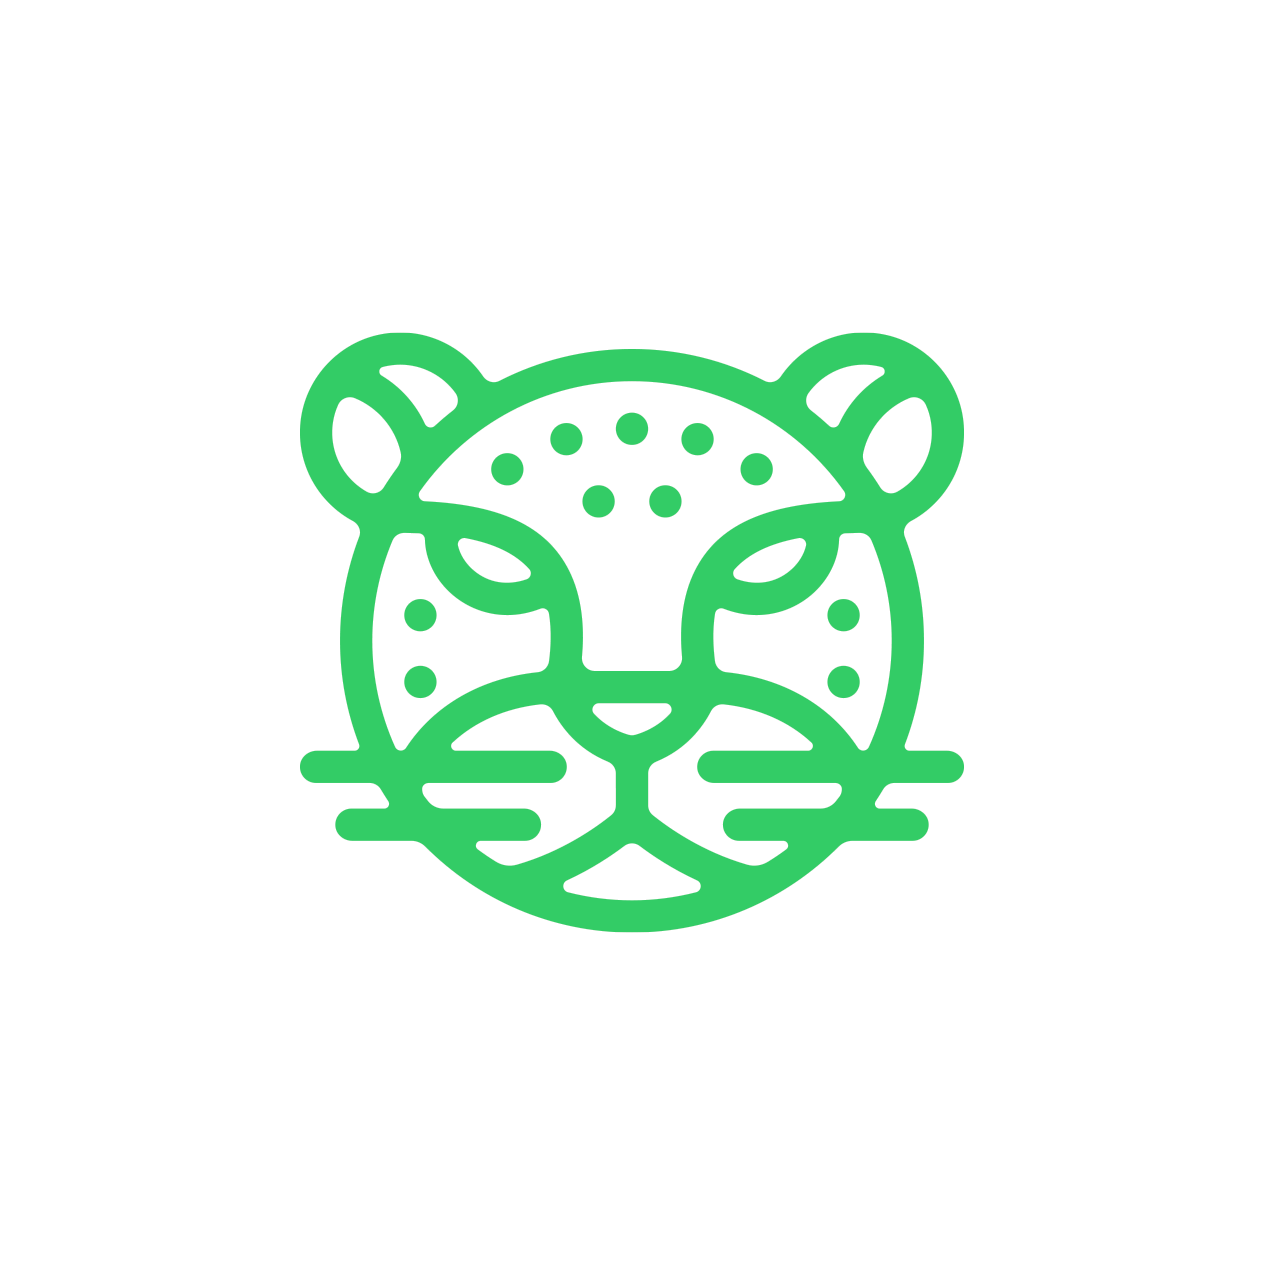 nelsoncouto-work-logos-capronparkzoo-v2